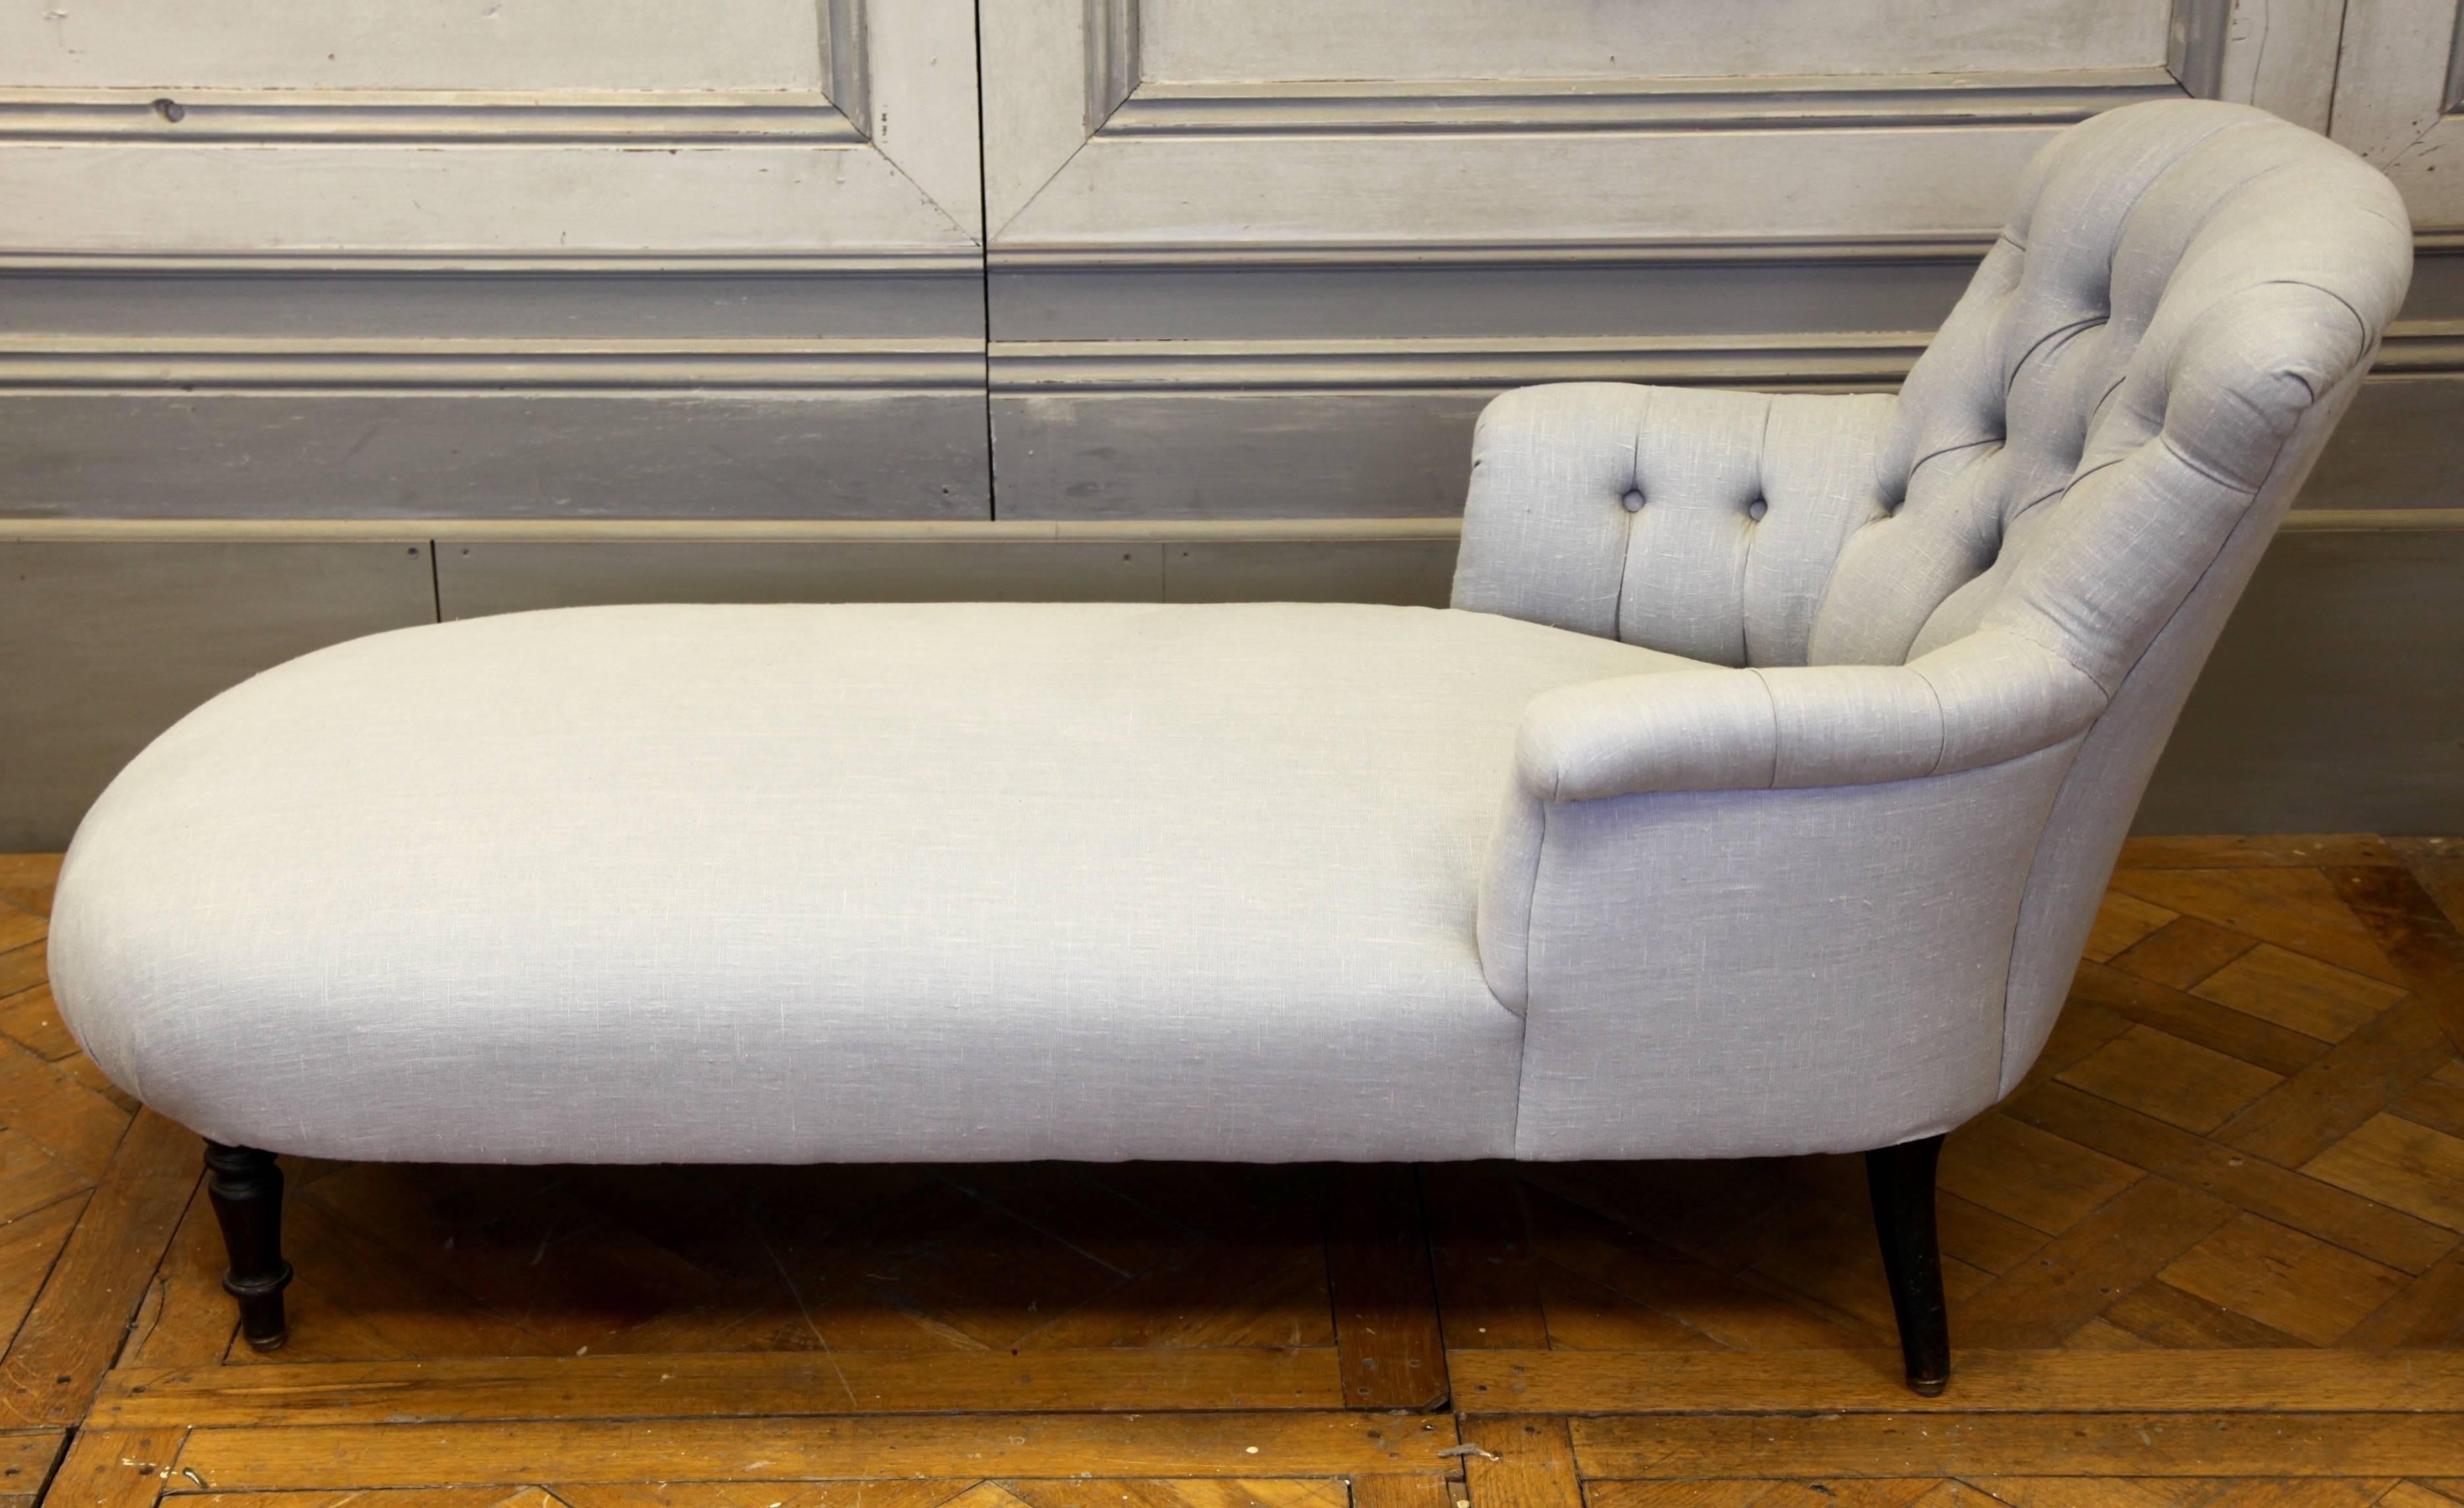 French chaise longue, circa 1870s. Original turned legs and reupholstered in French grey linen with deep buttoned arms and backrest.